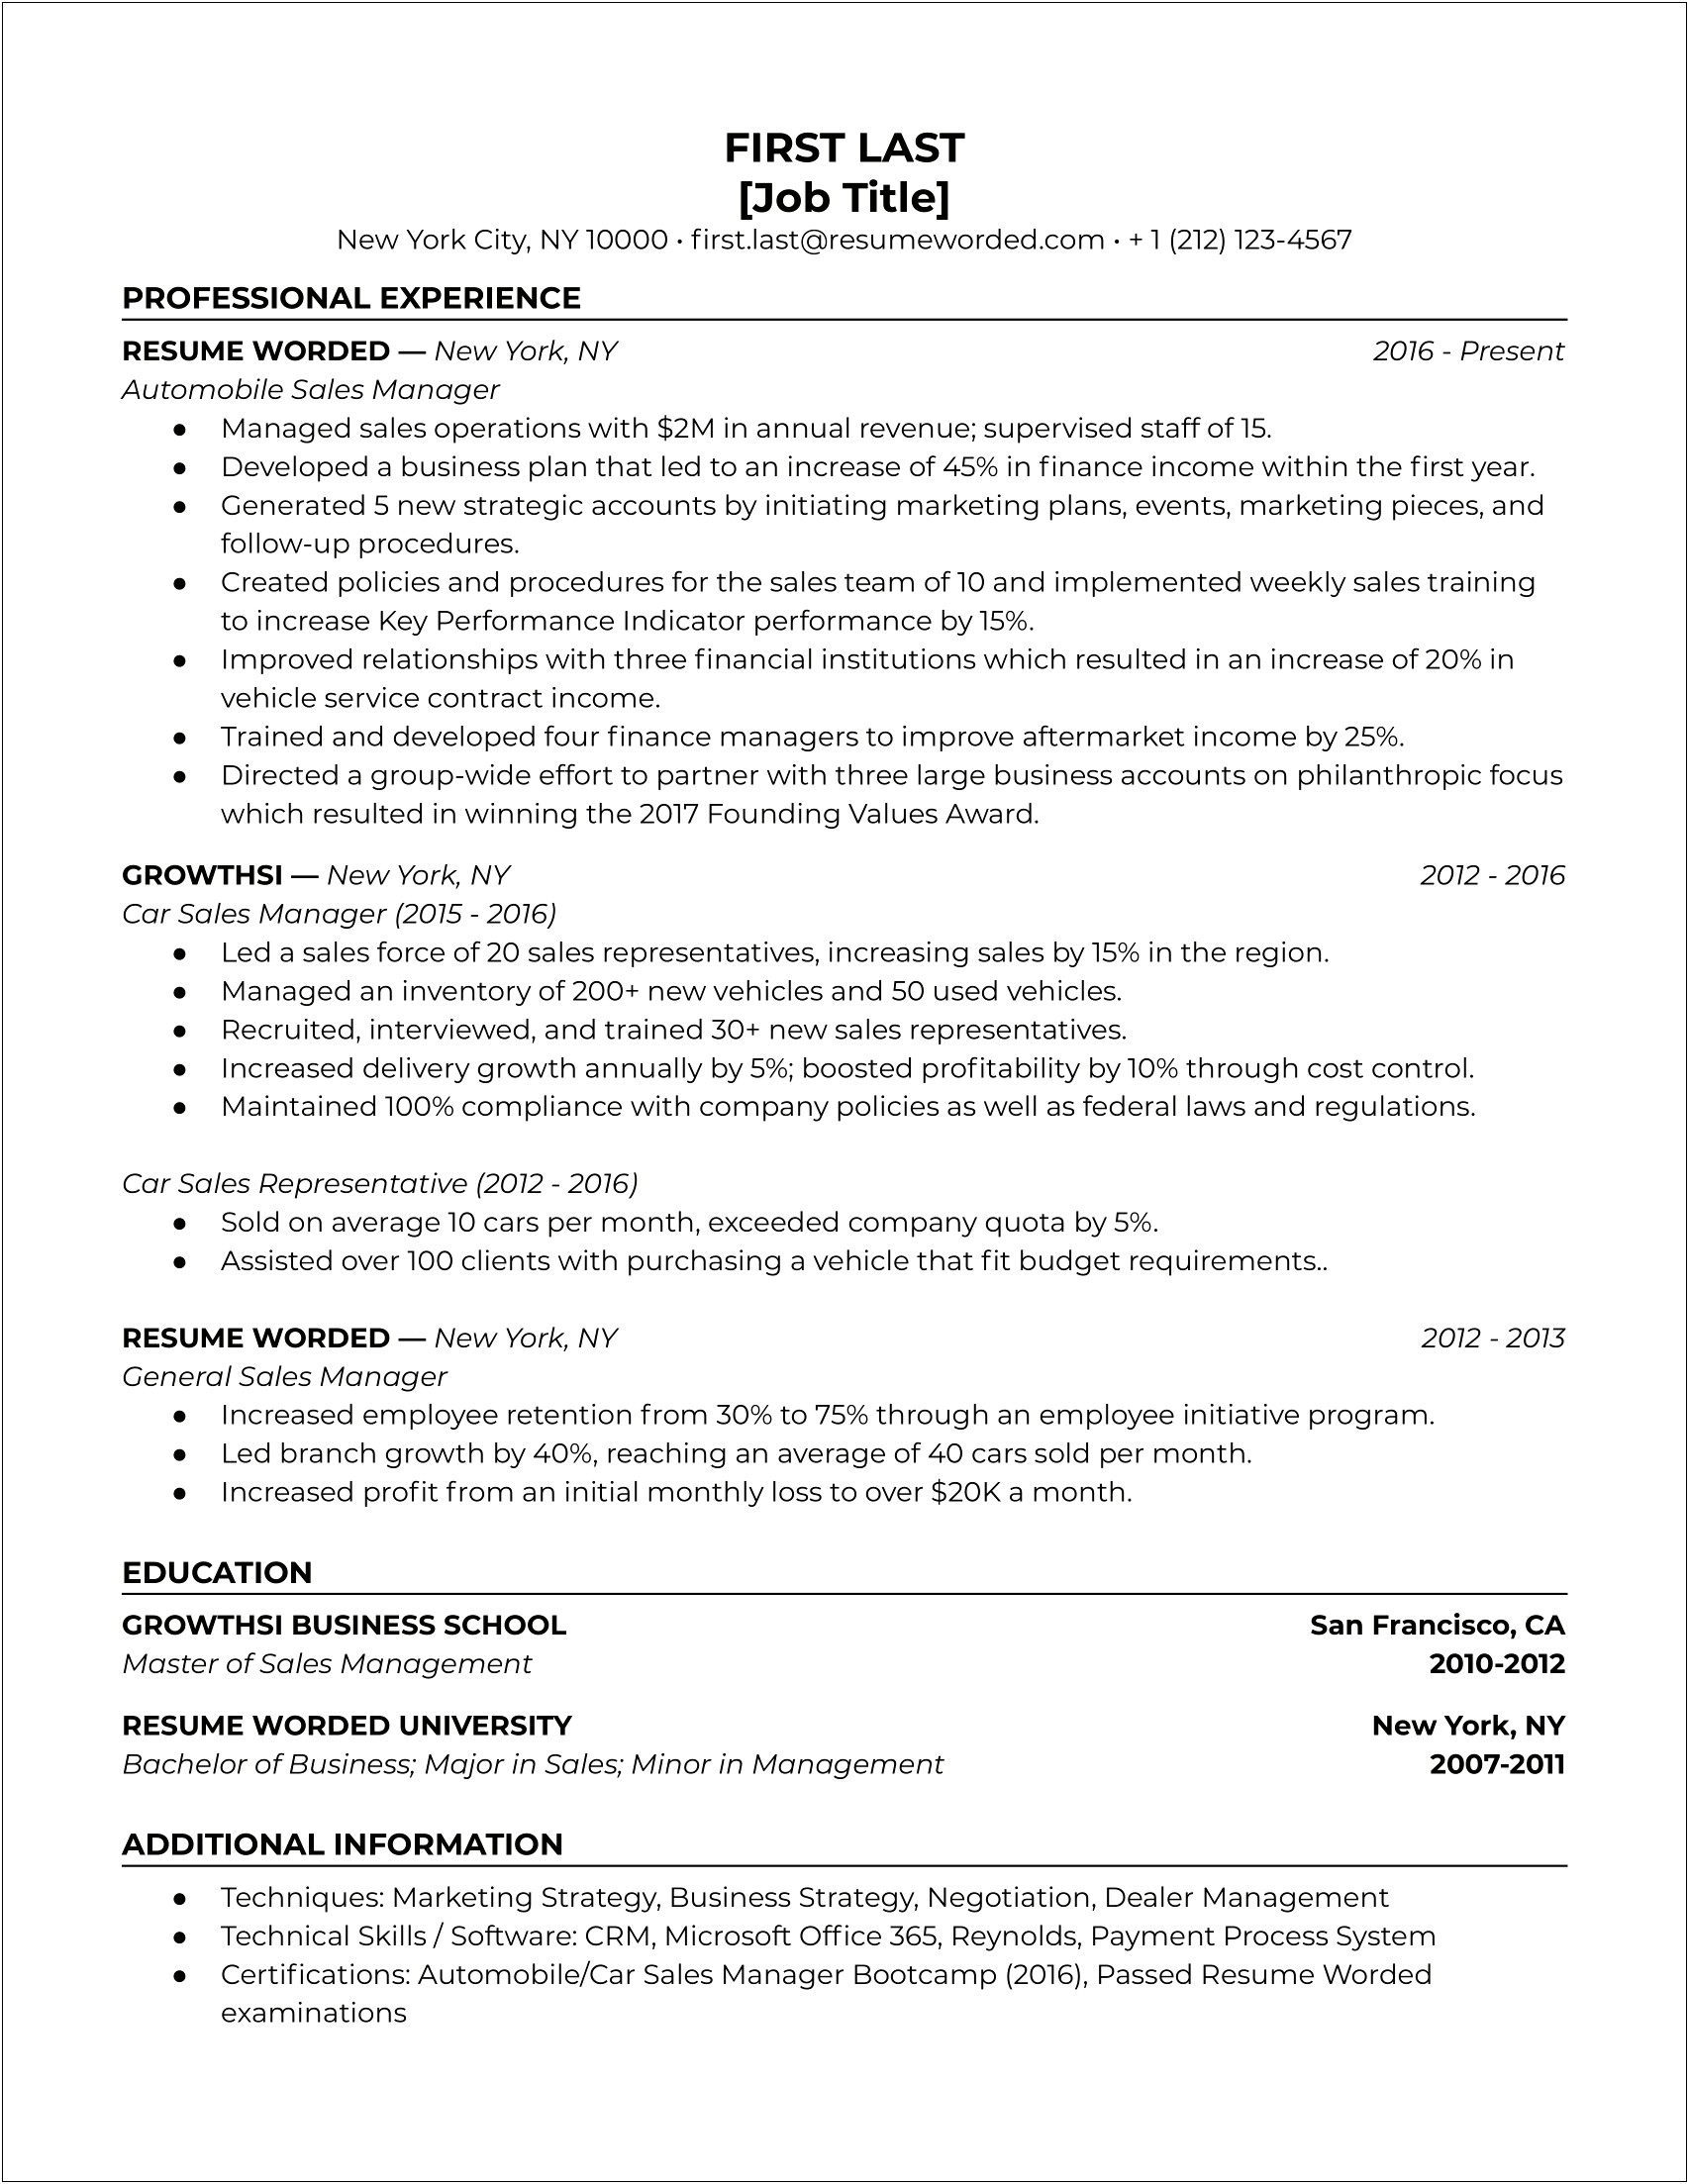 Resume Objective Statement For Loss Prevention